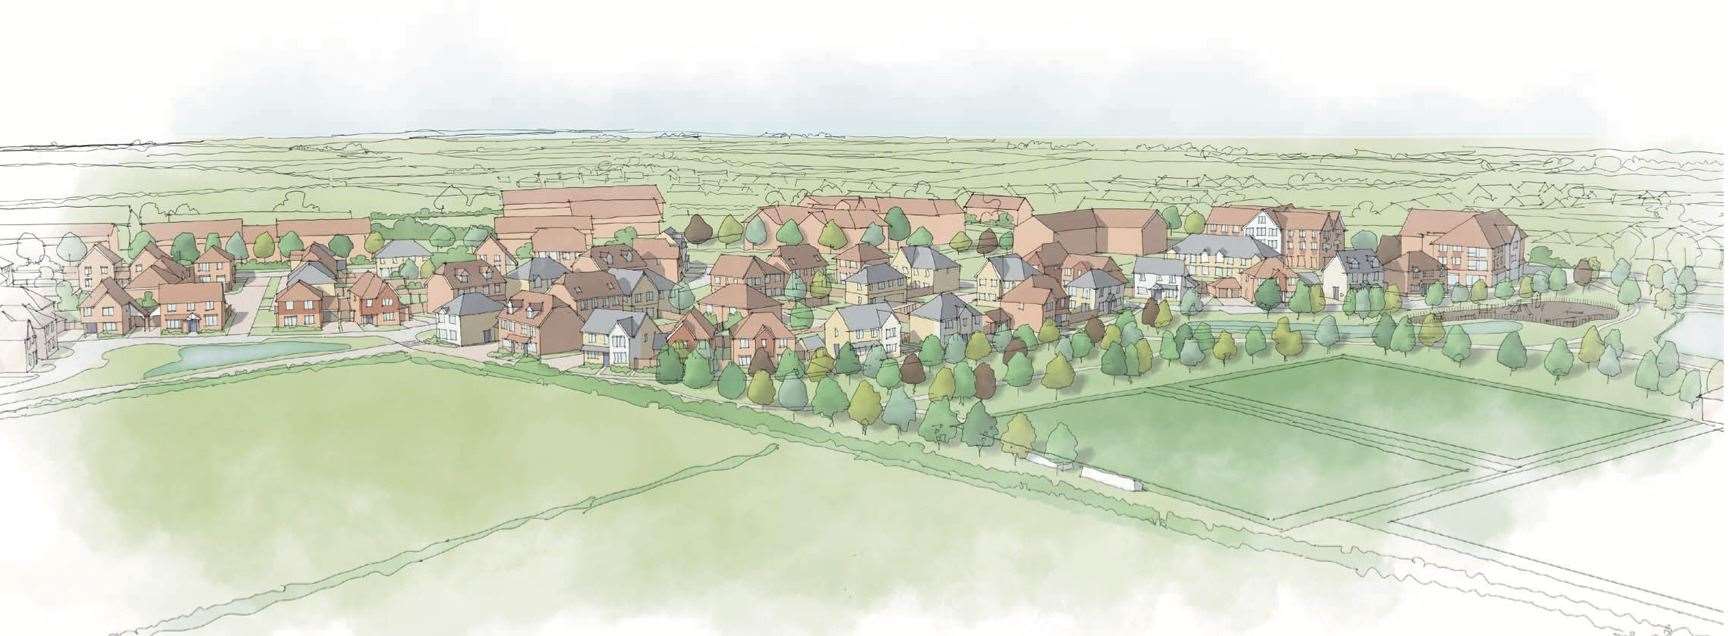 An artist’s impression of how the development planned for Lady Dane Farm in Faversham could look